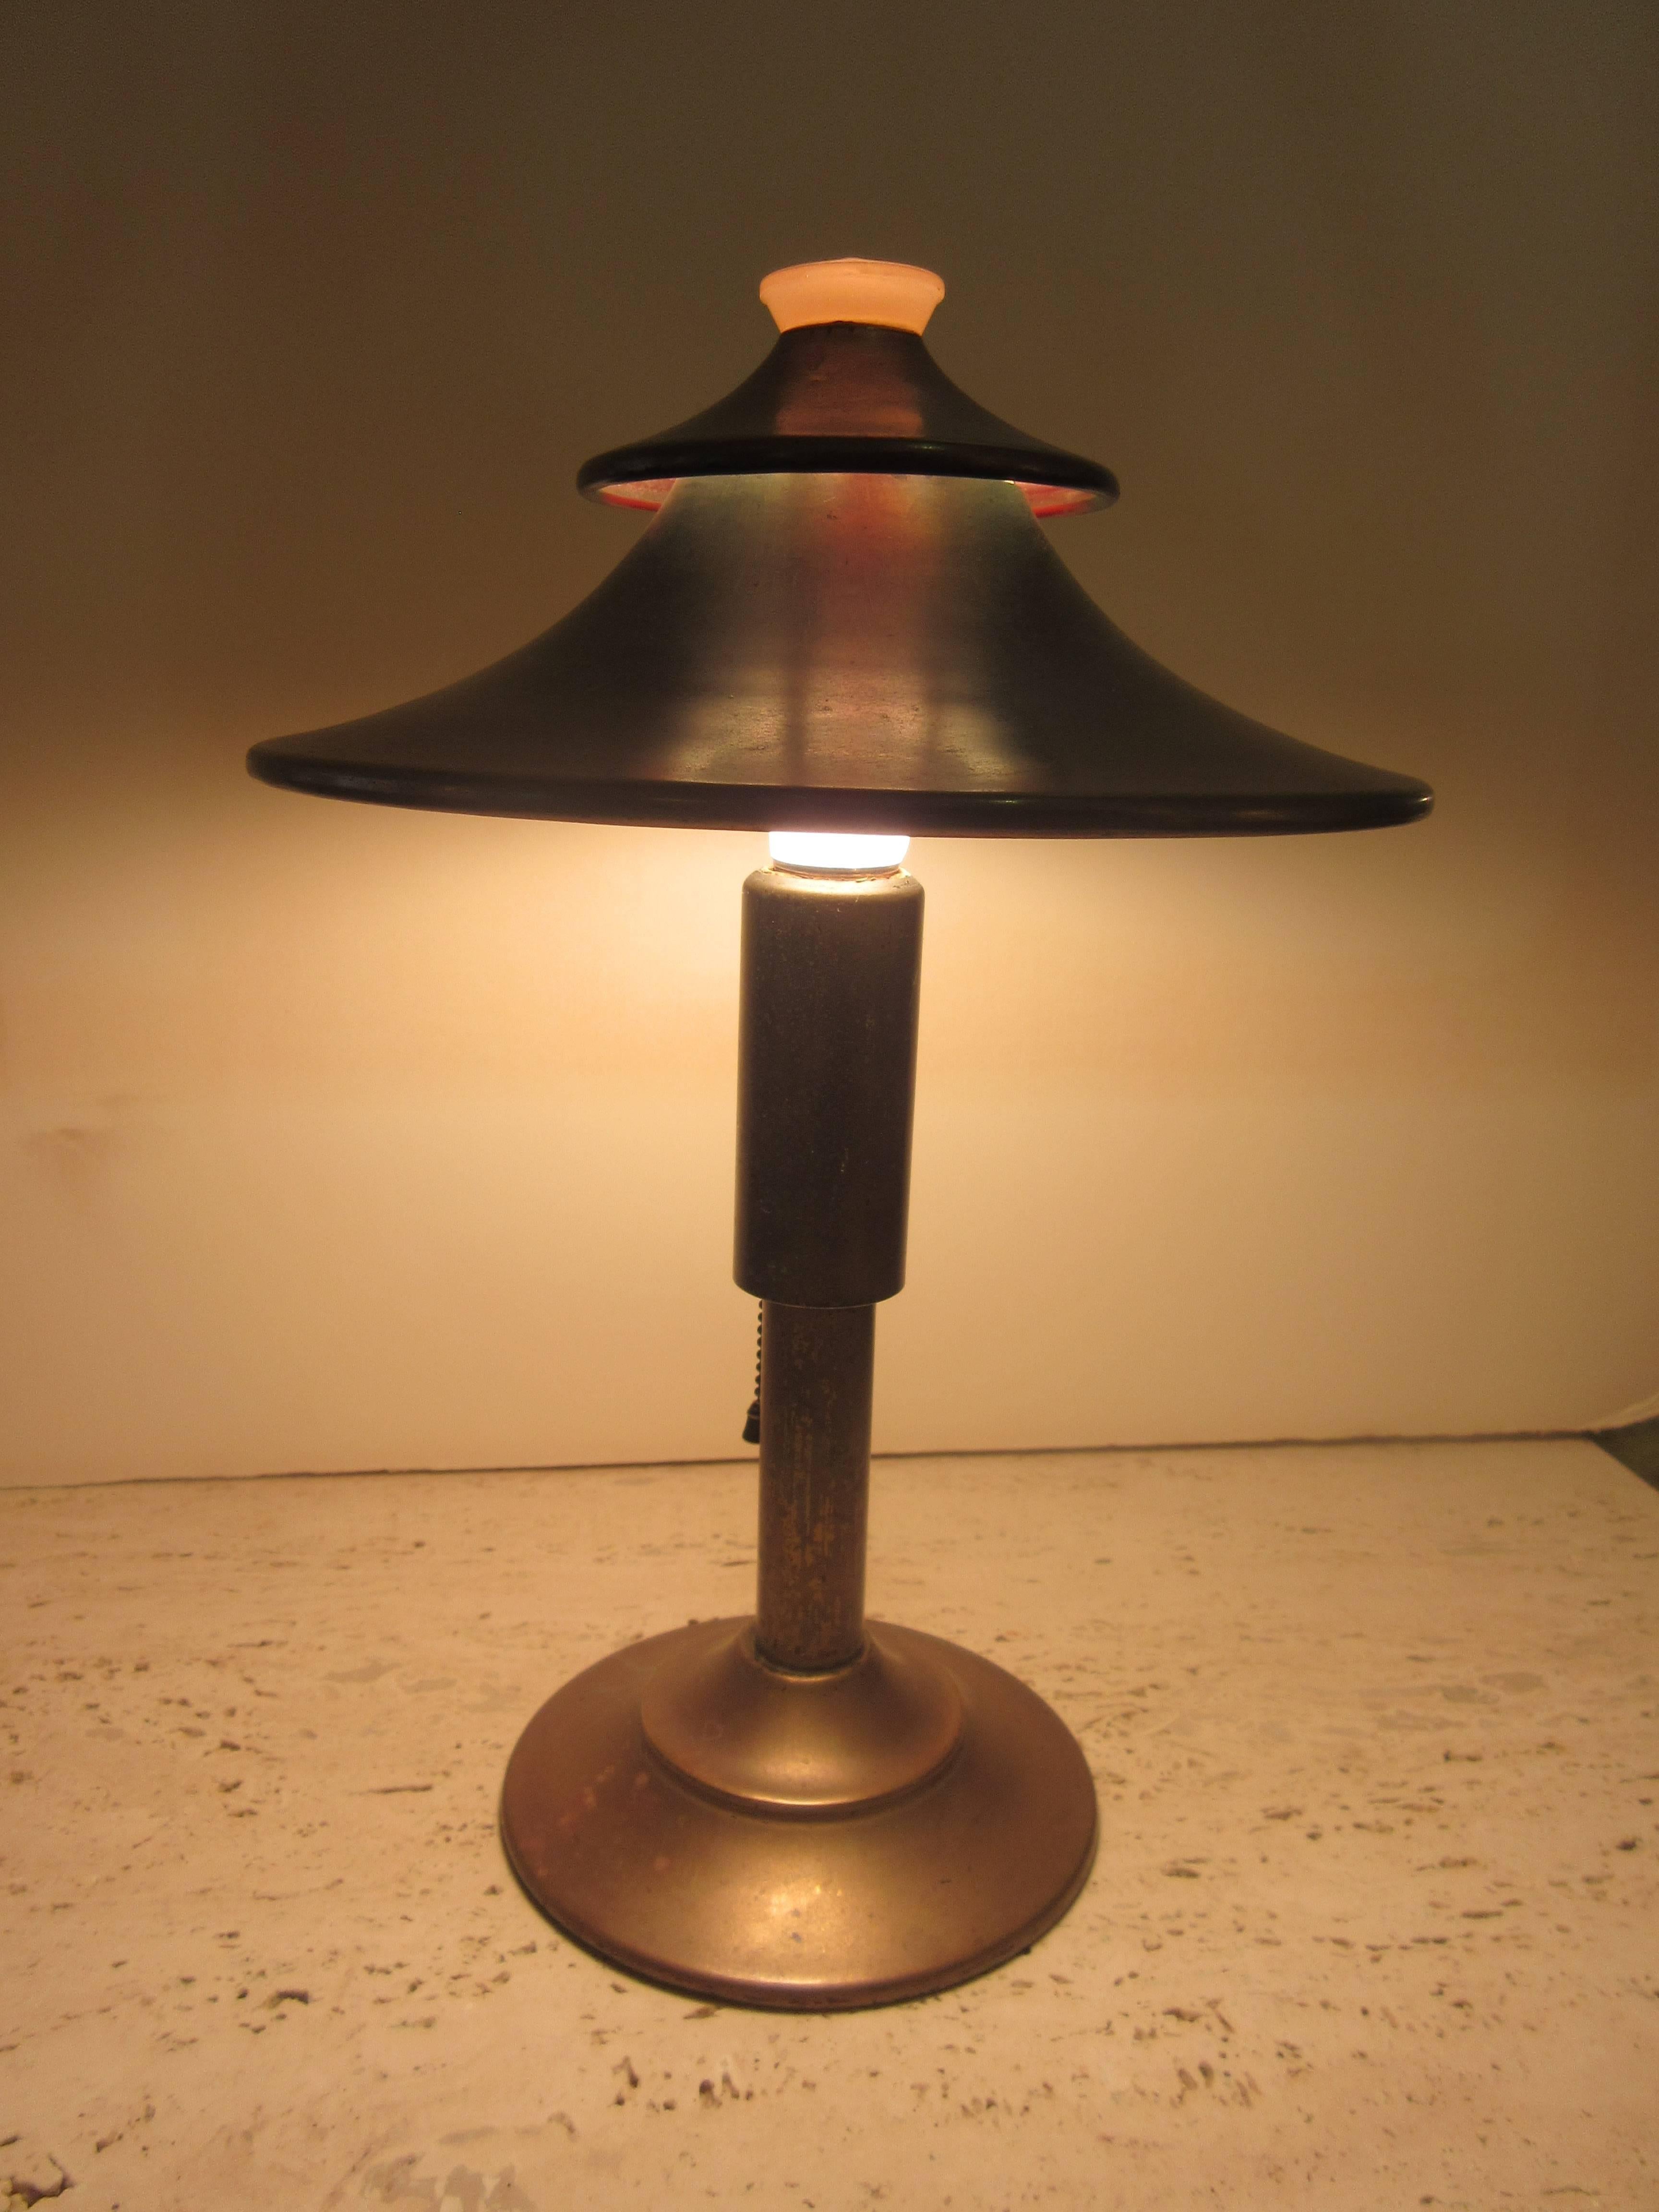 This Pagoda lamp actually designed by Leroy Doane had for years been misattributed to KEM Weber. Manufactured by the Miller Company in the early 1930s. This is a very original, desirable version with the pull chain switch. Peach glass diffuser top